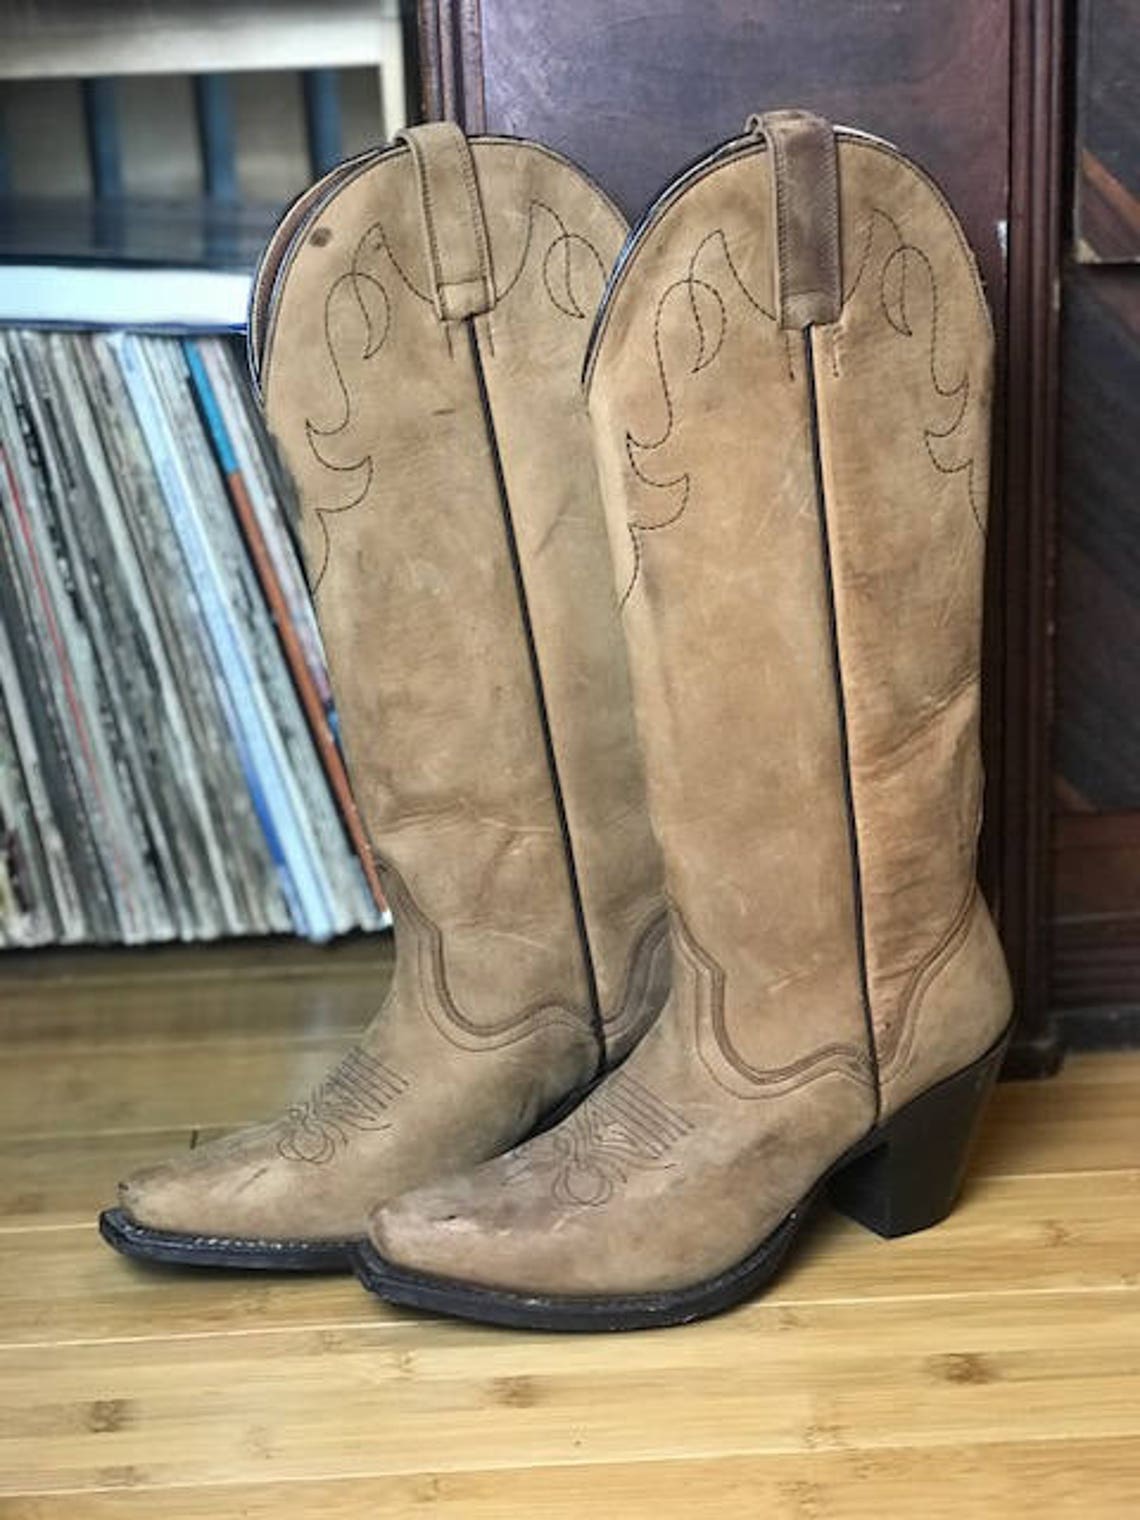 Tall Suede JB Dillon Cowboy Boots | Etsy